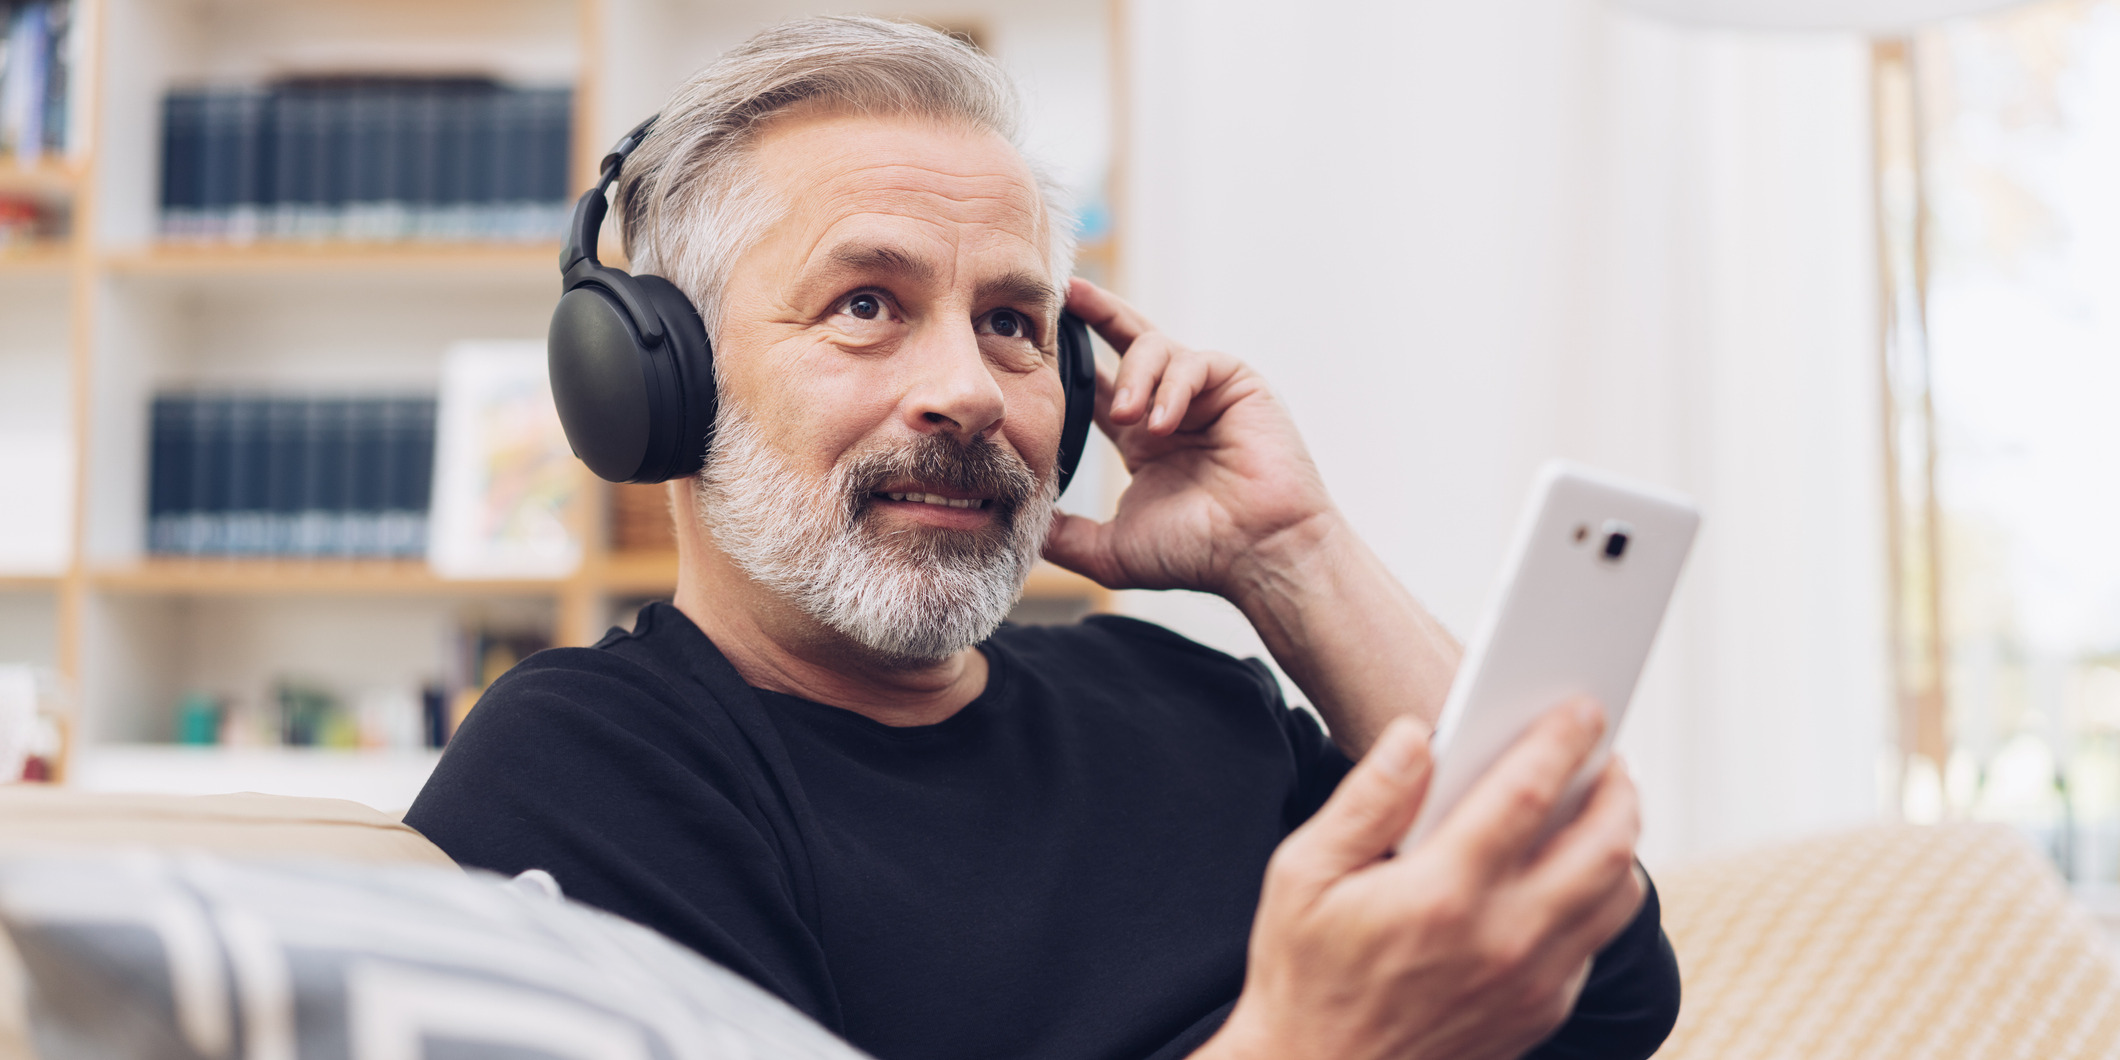 5 Sales Podcasts That Motivate Sales Teams